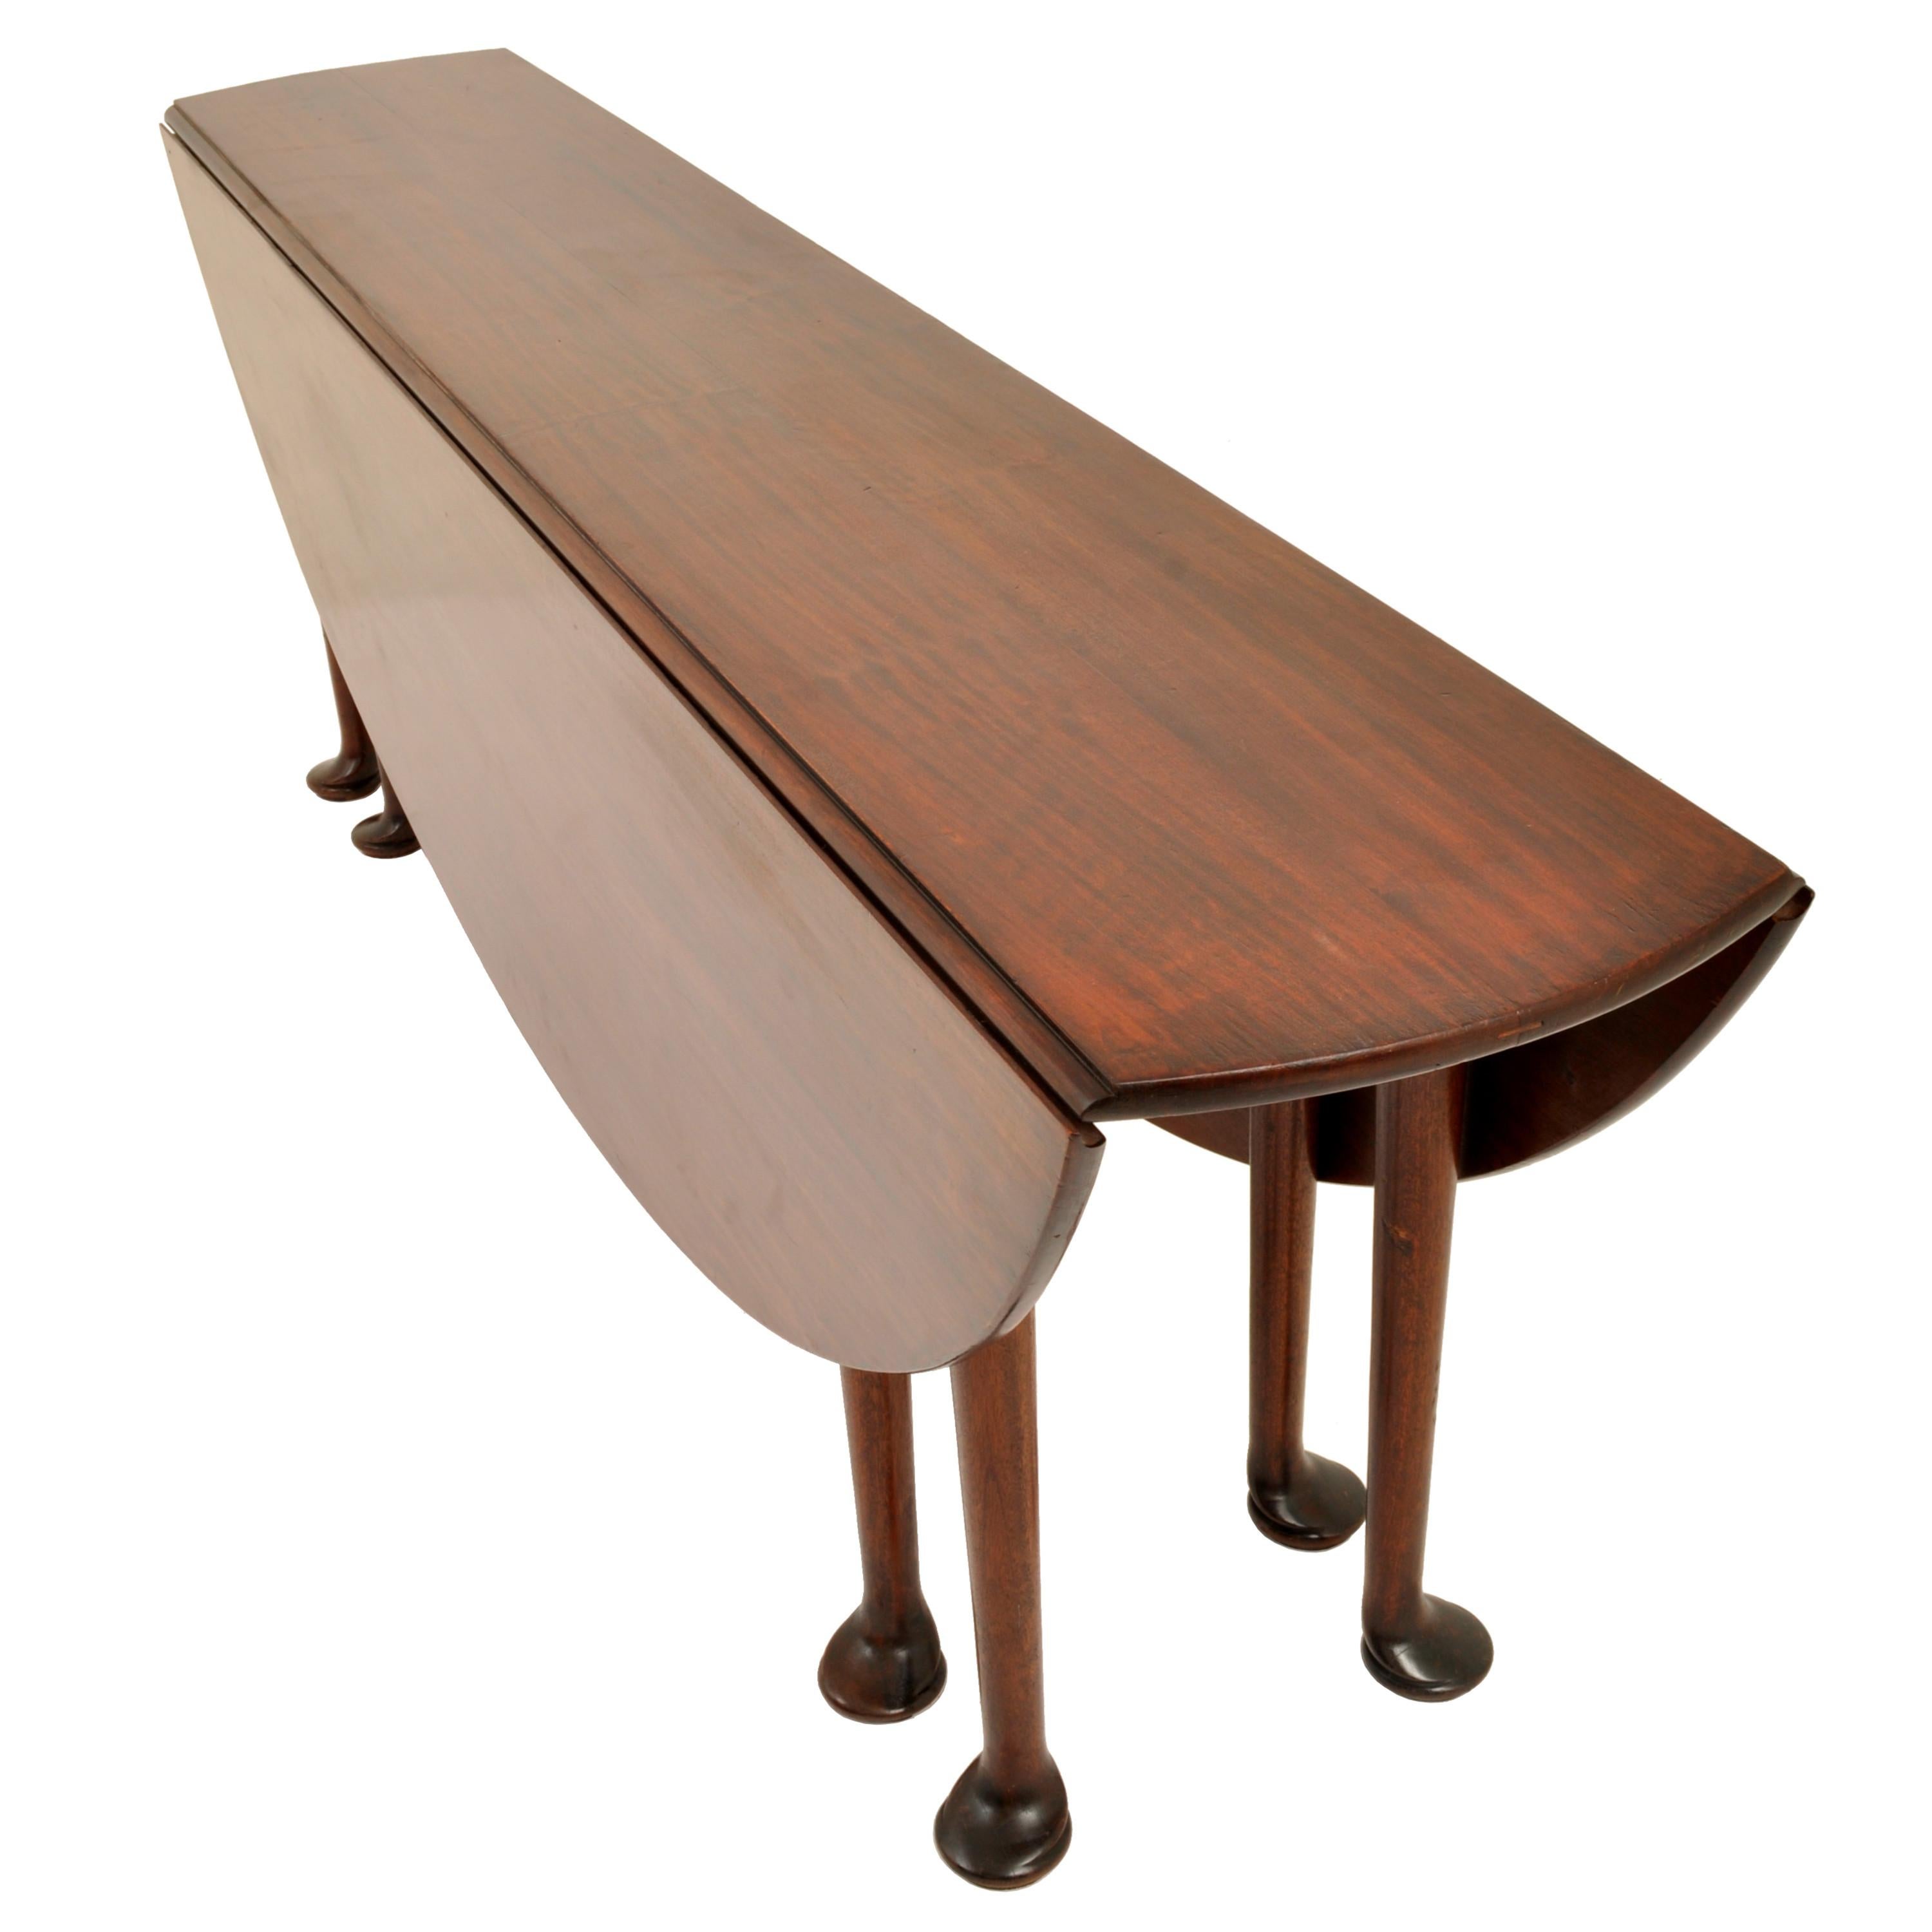 A fine and large Georgian mahogany wake or harvest table, circa 1760. The long table of drop-leaf and gateleg form, made of solid figured mahogany, having eight robust legs with substantial pad feet. The table having demilune drop leaves, each